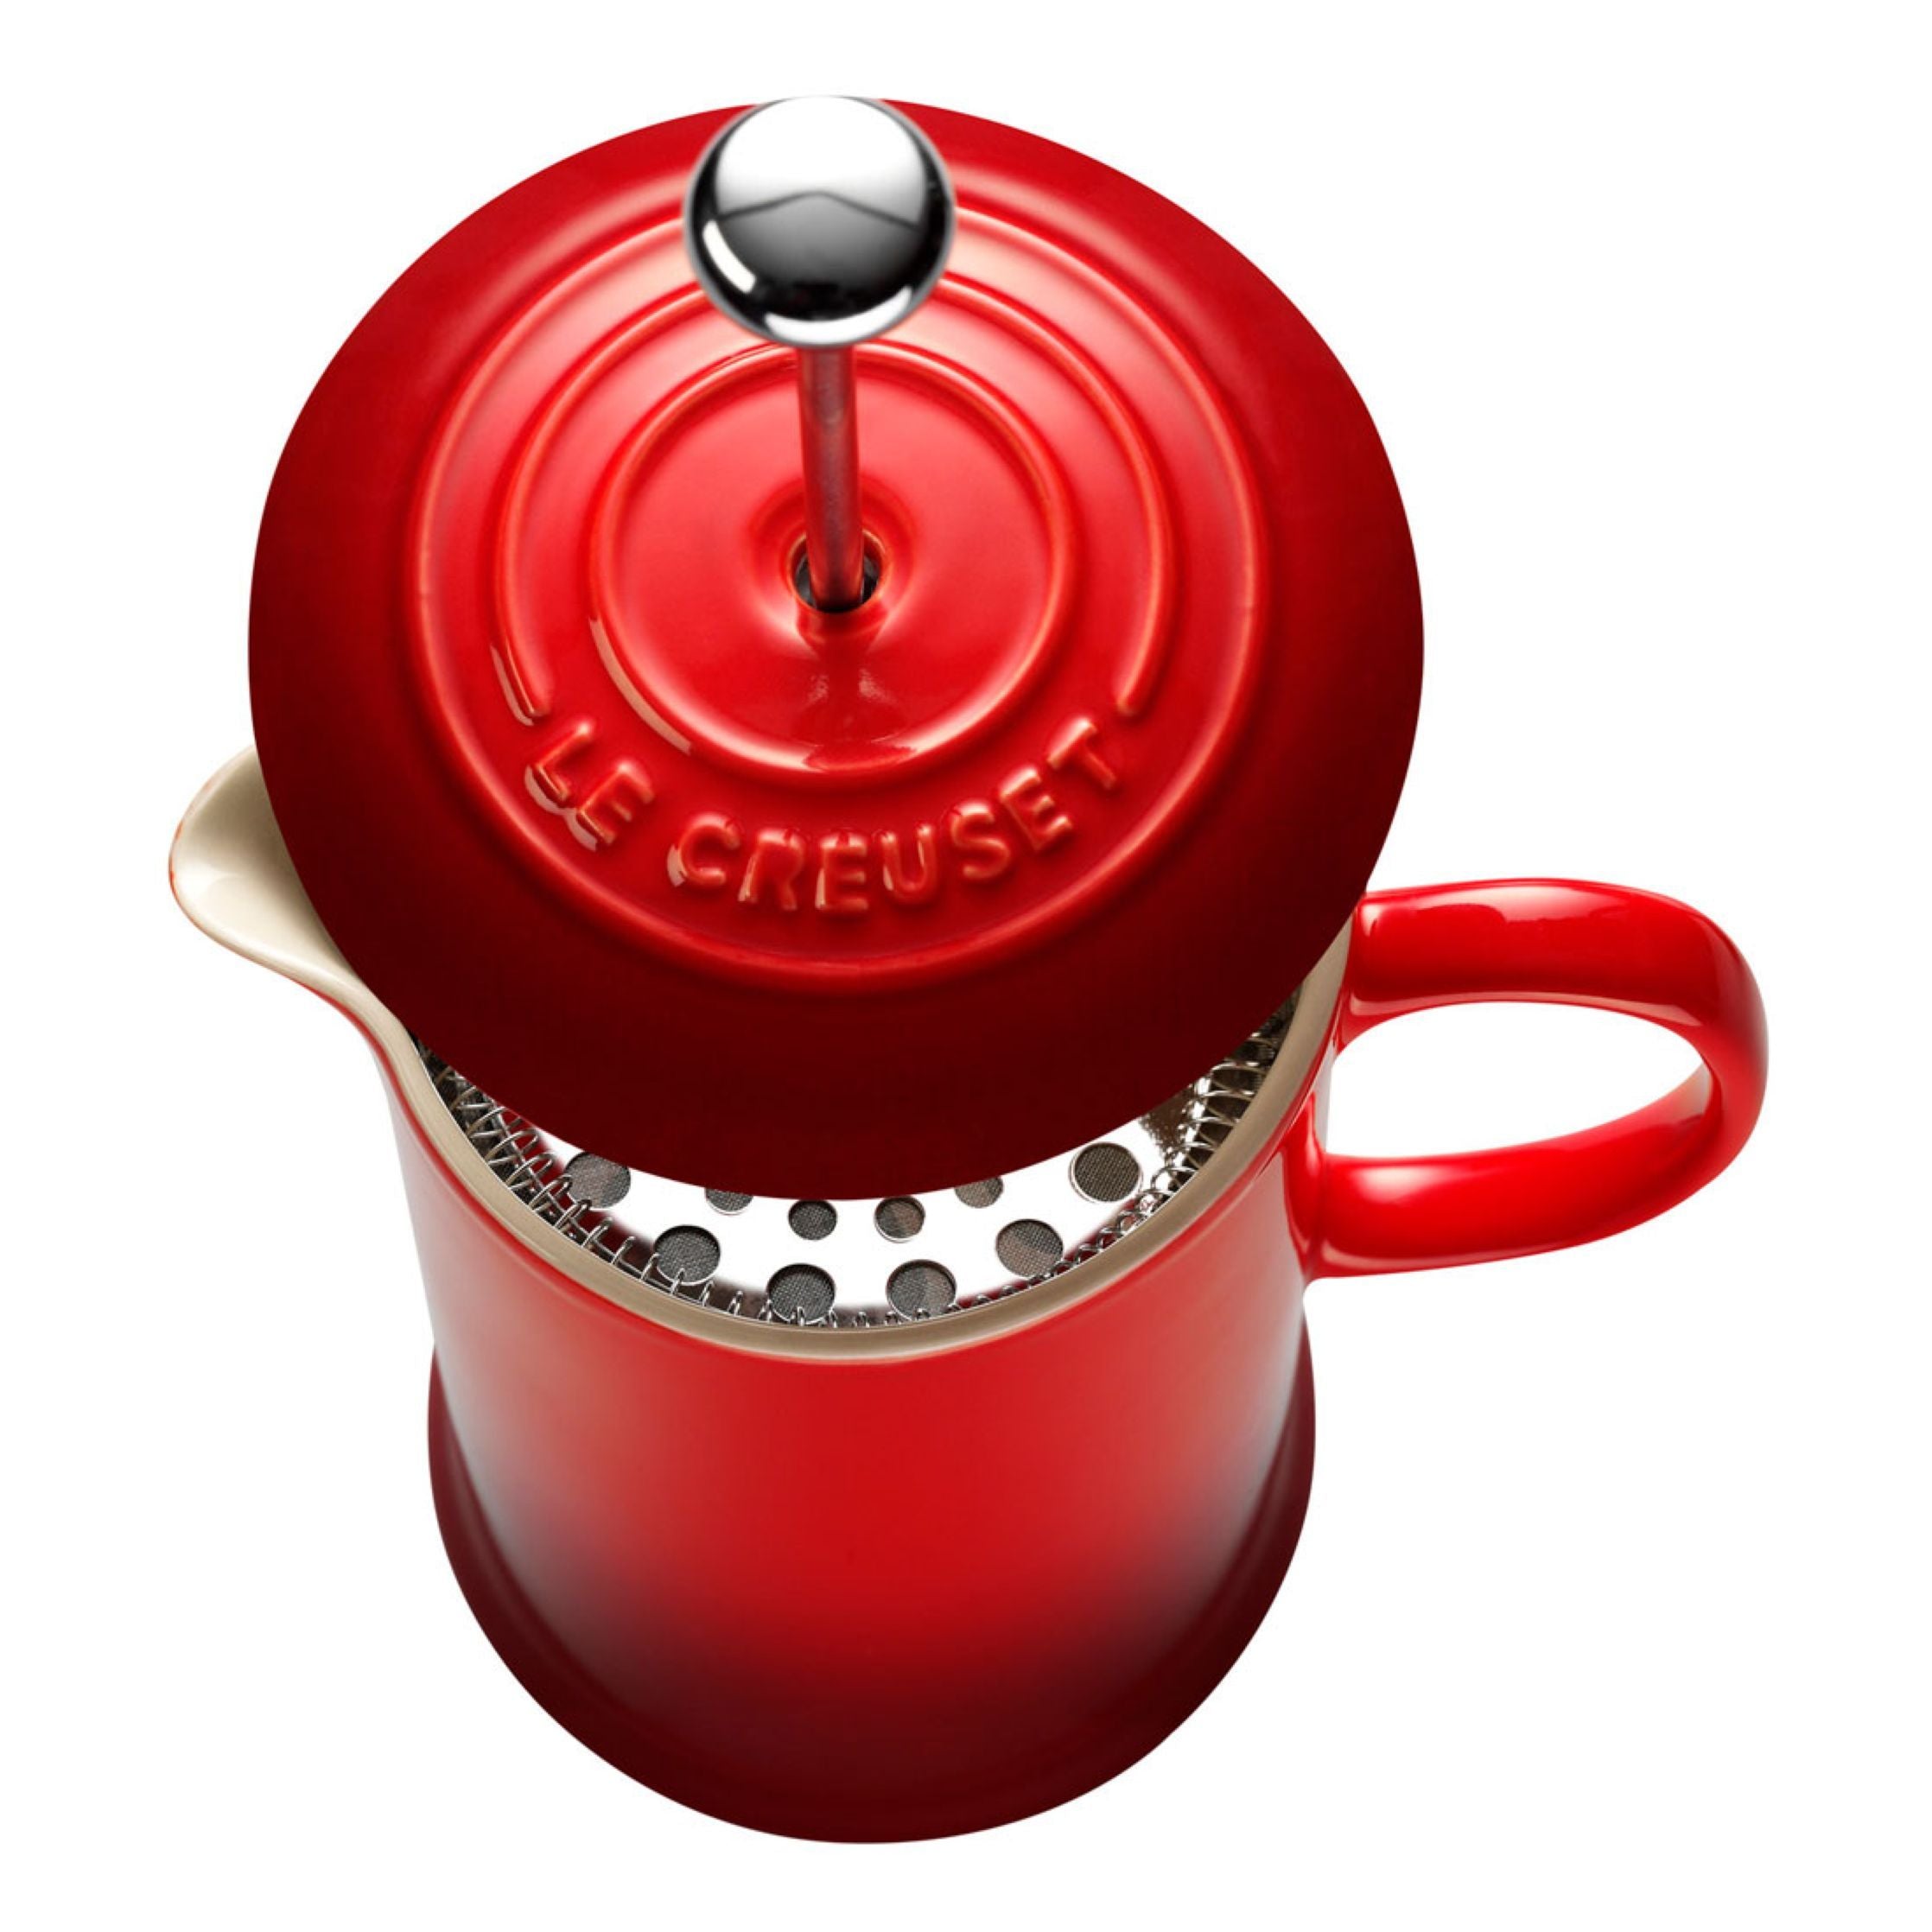 Le Creuset Coffee Maker 1 L, Cherry Red